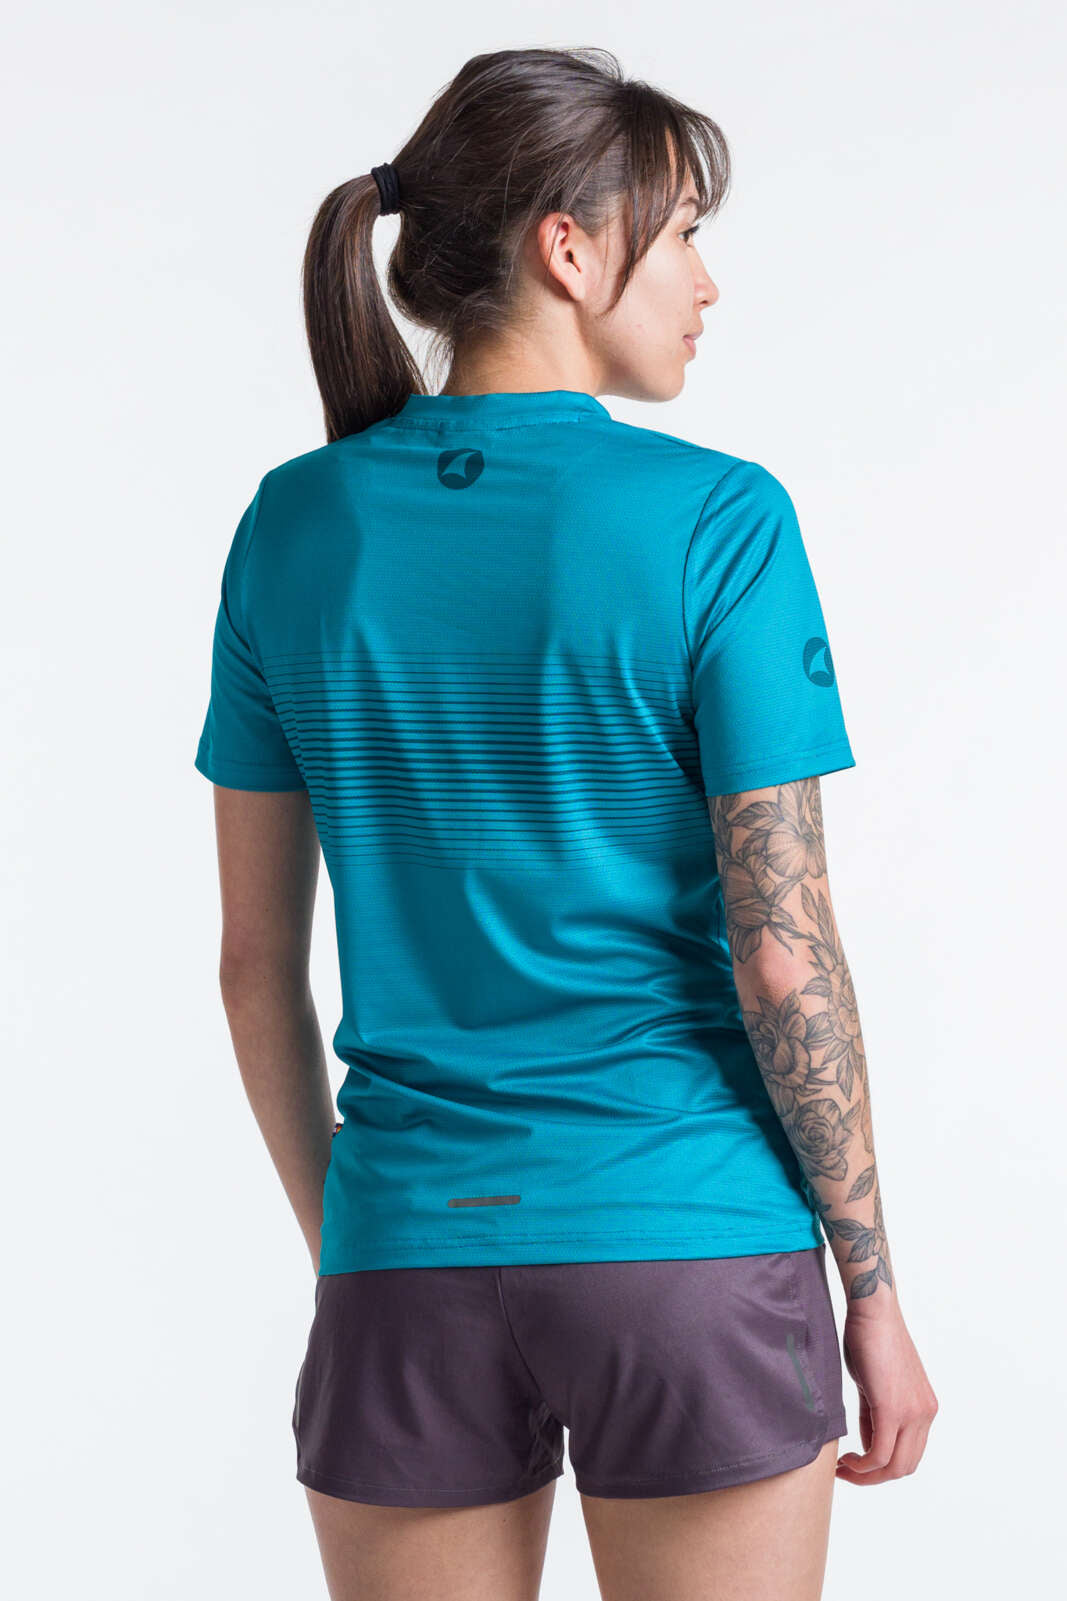 & Women\'s Teal Pactimo | Breathable Shirt Lightweight | Running